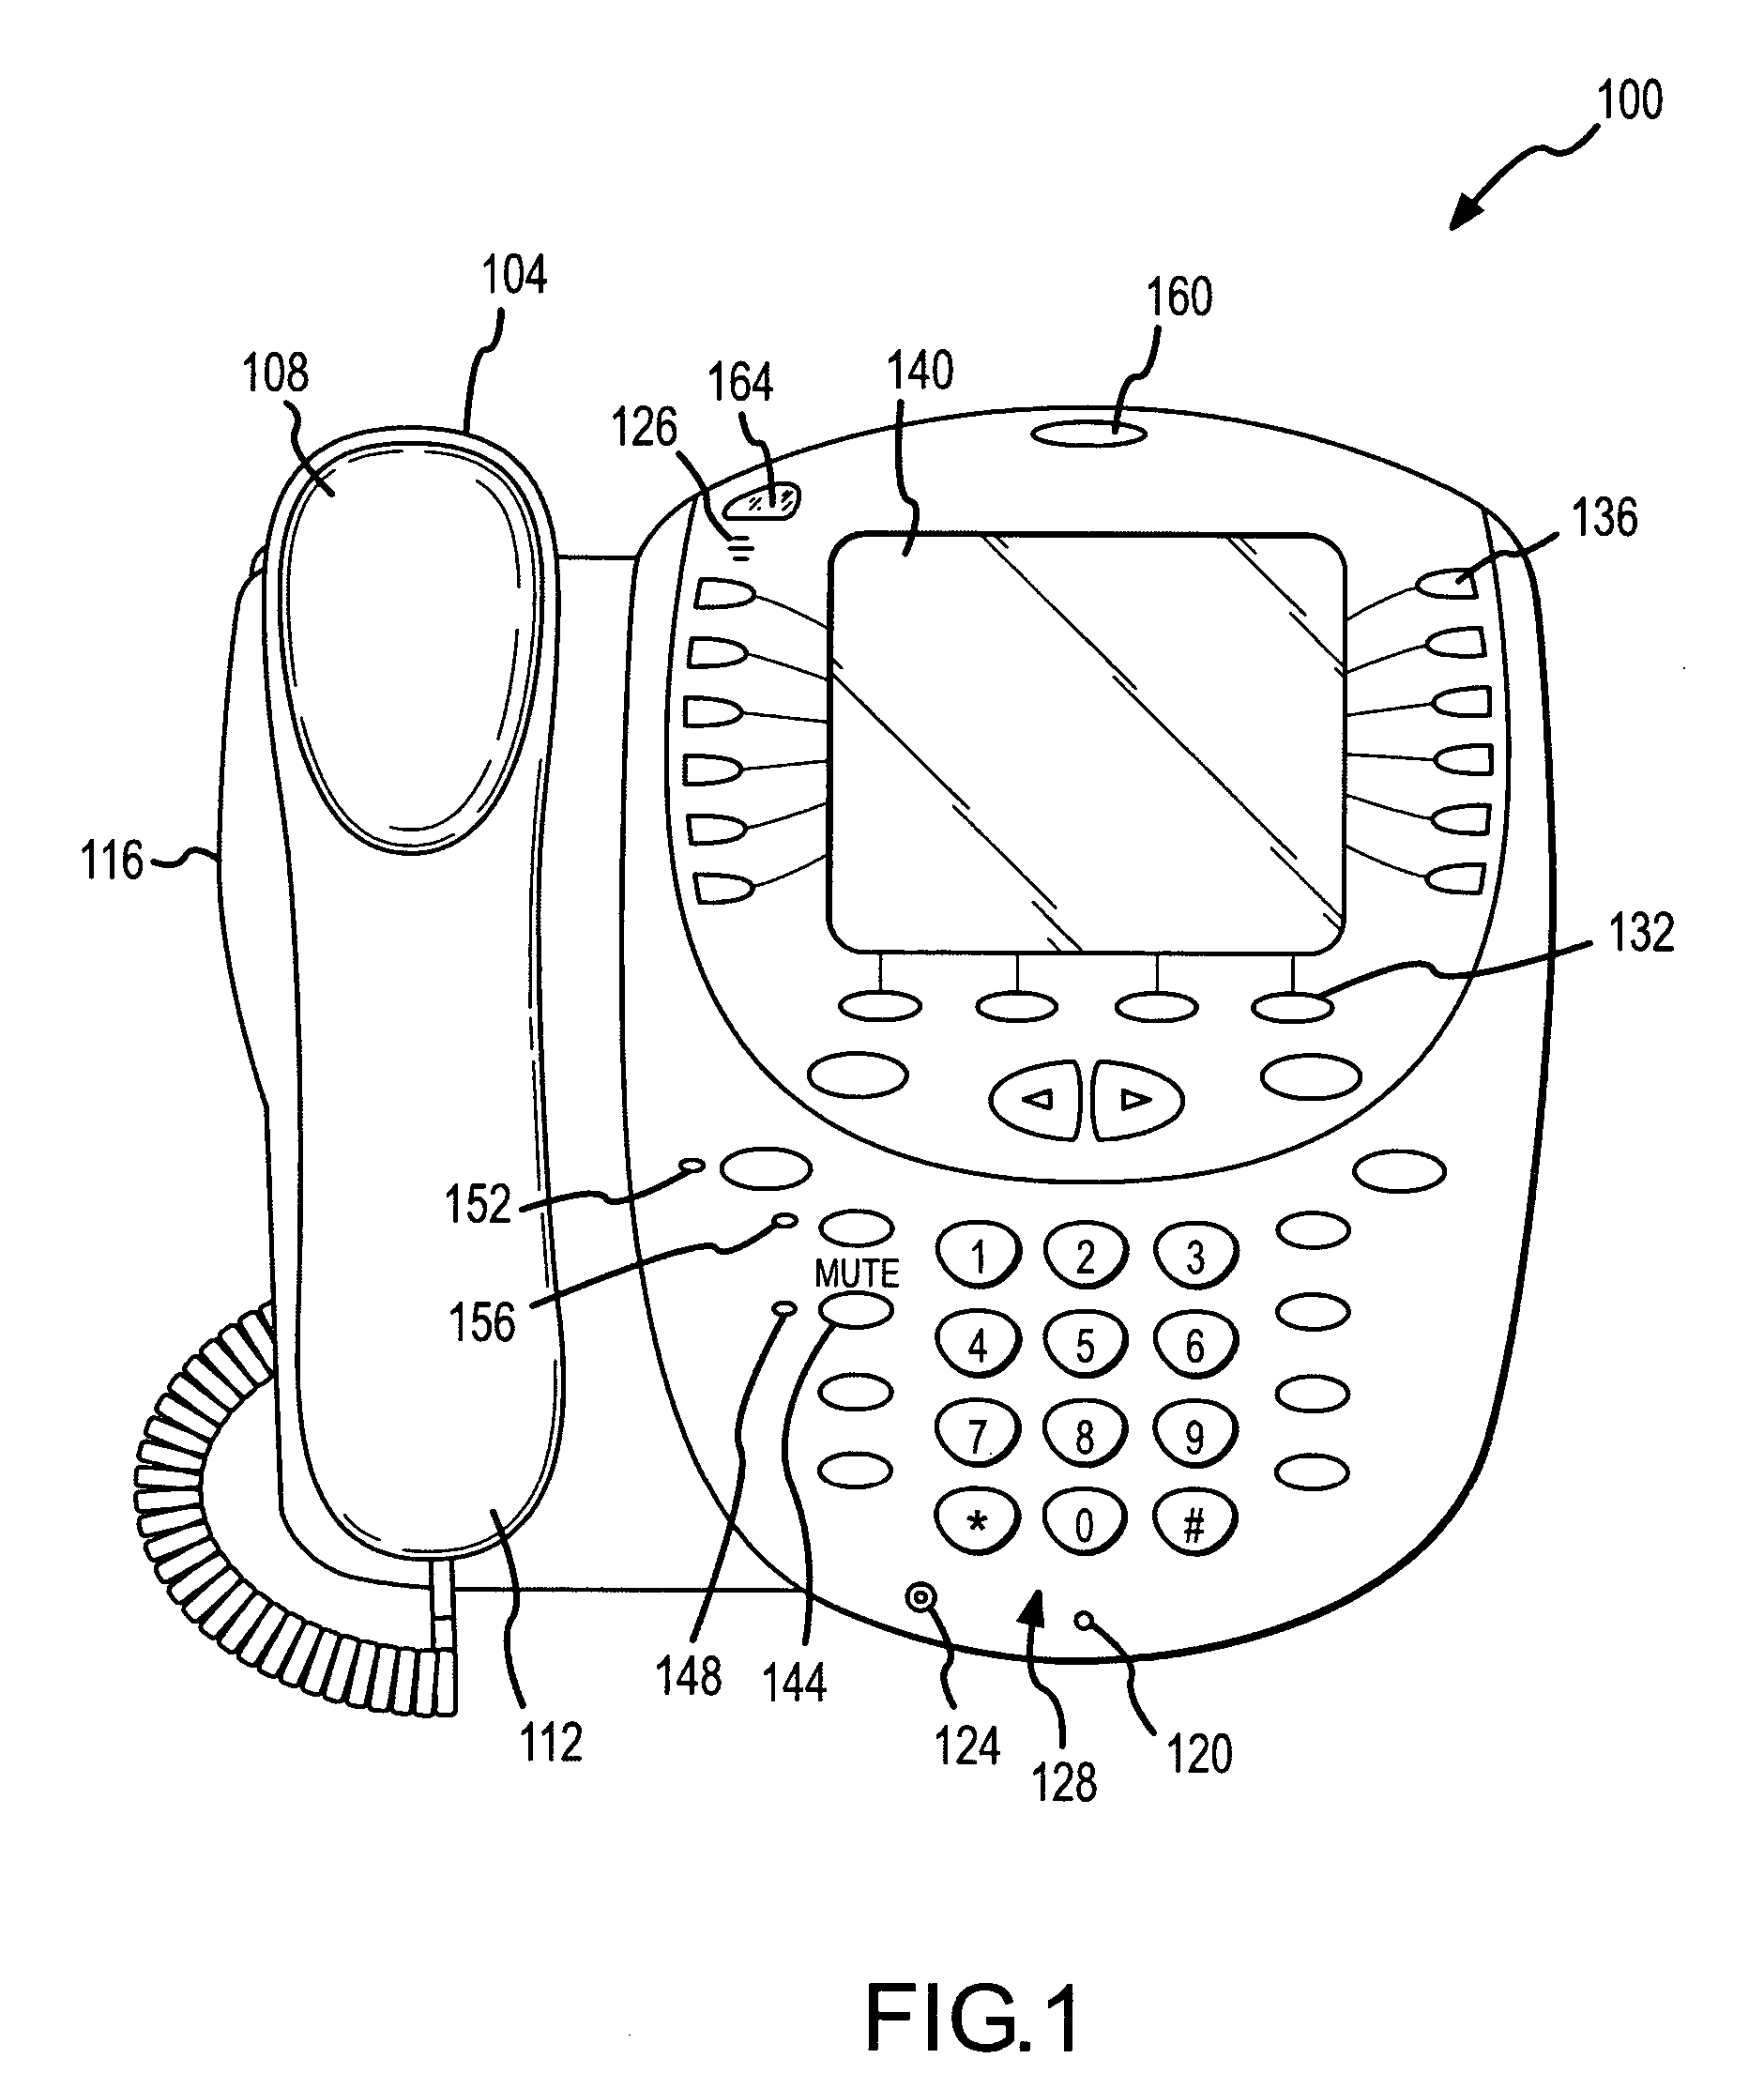 Voice activated phone mute reminder method and apparatus